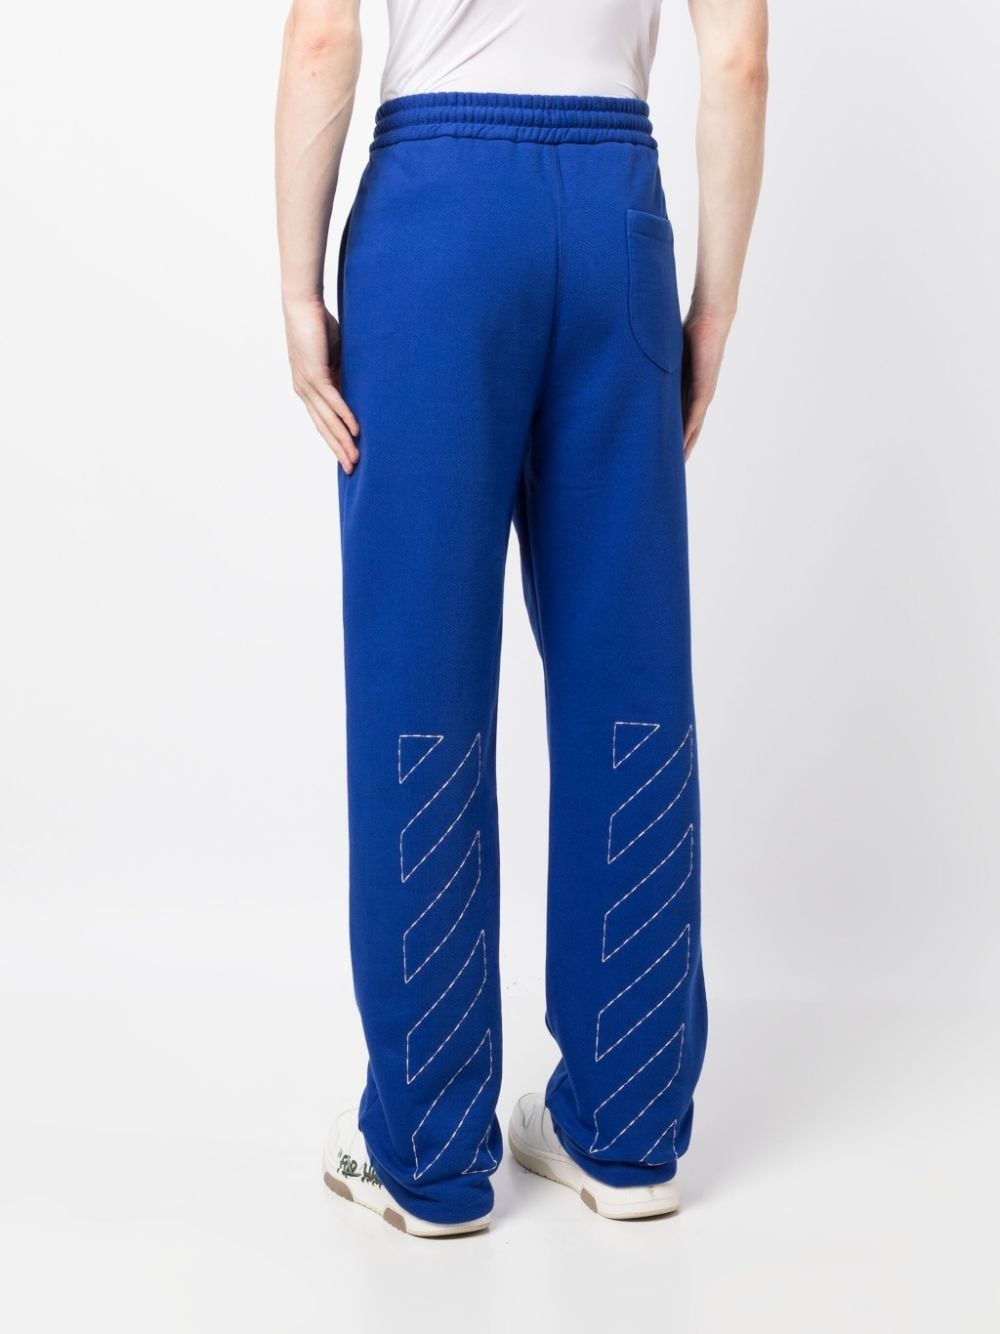 Diag-Stripe embroidered track pants - 4